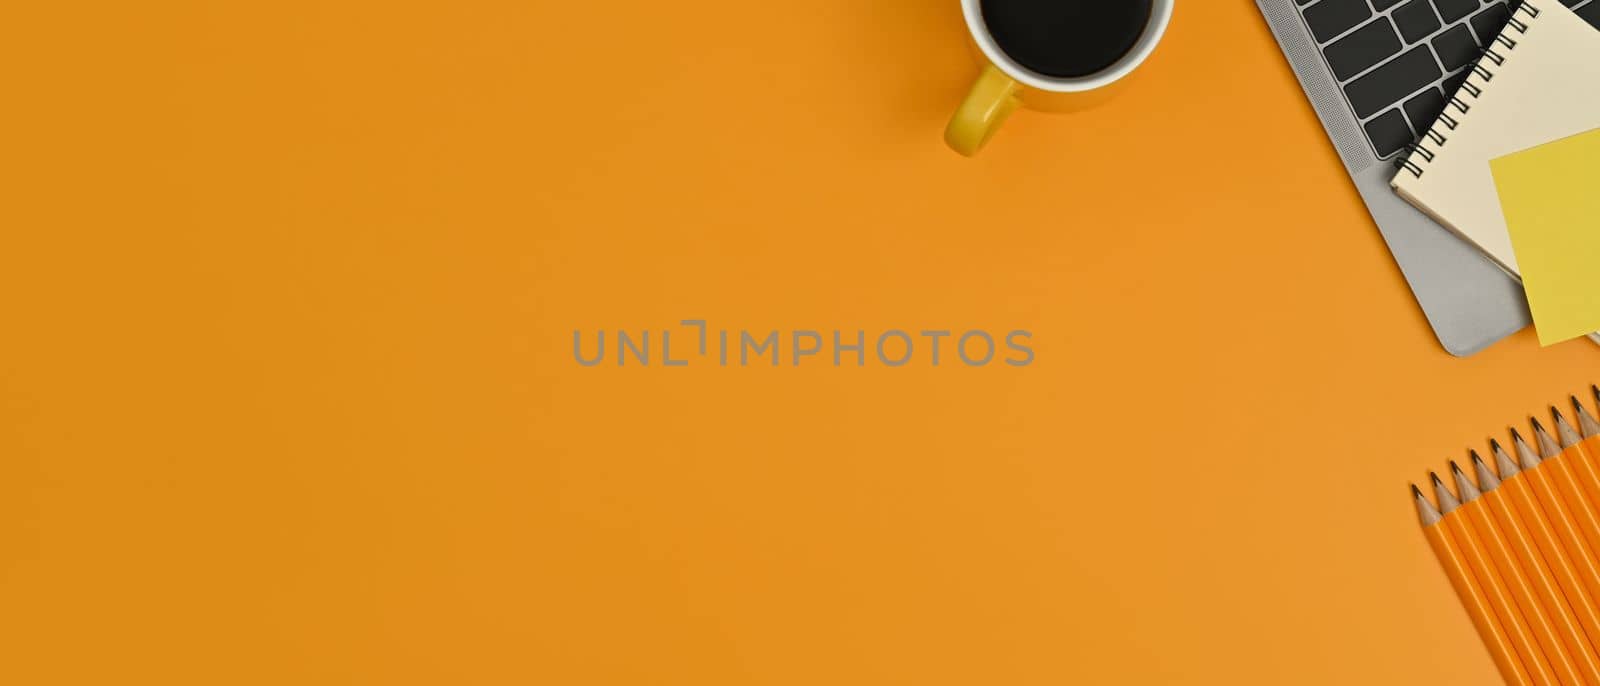 Laptop computer, notepad and coffee cup on yellow background. Copy space for your advertise text by prathanchorruangsak